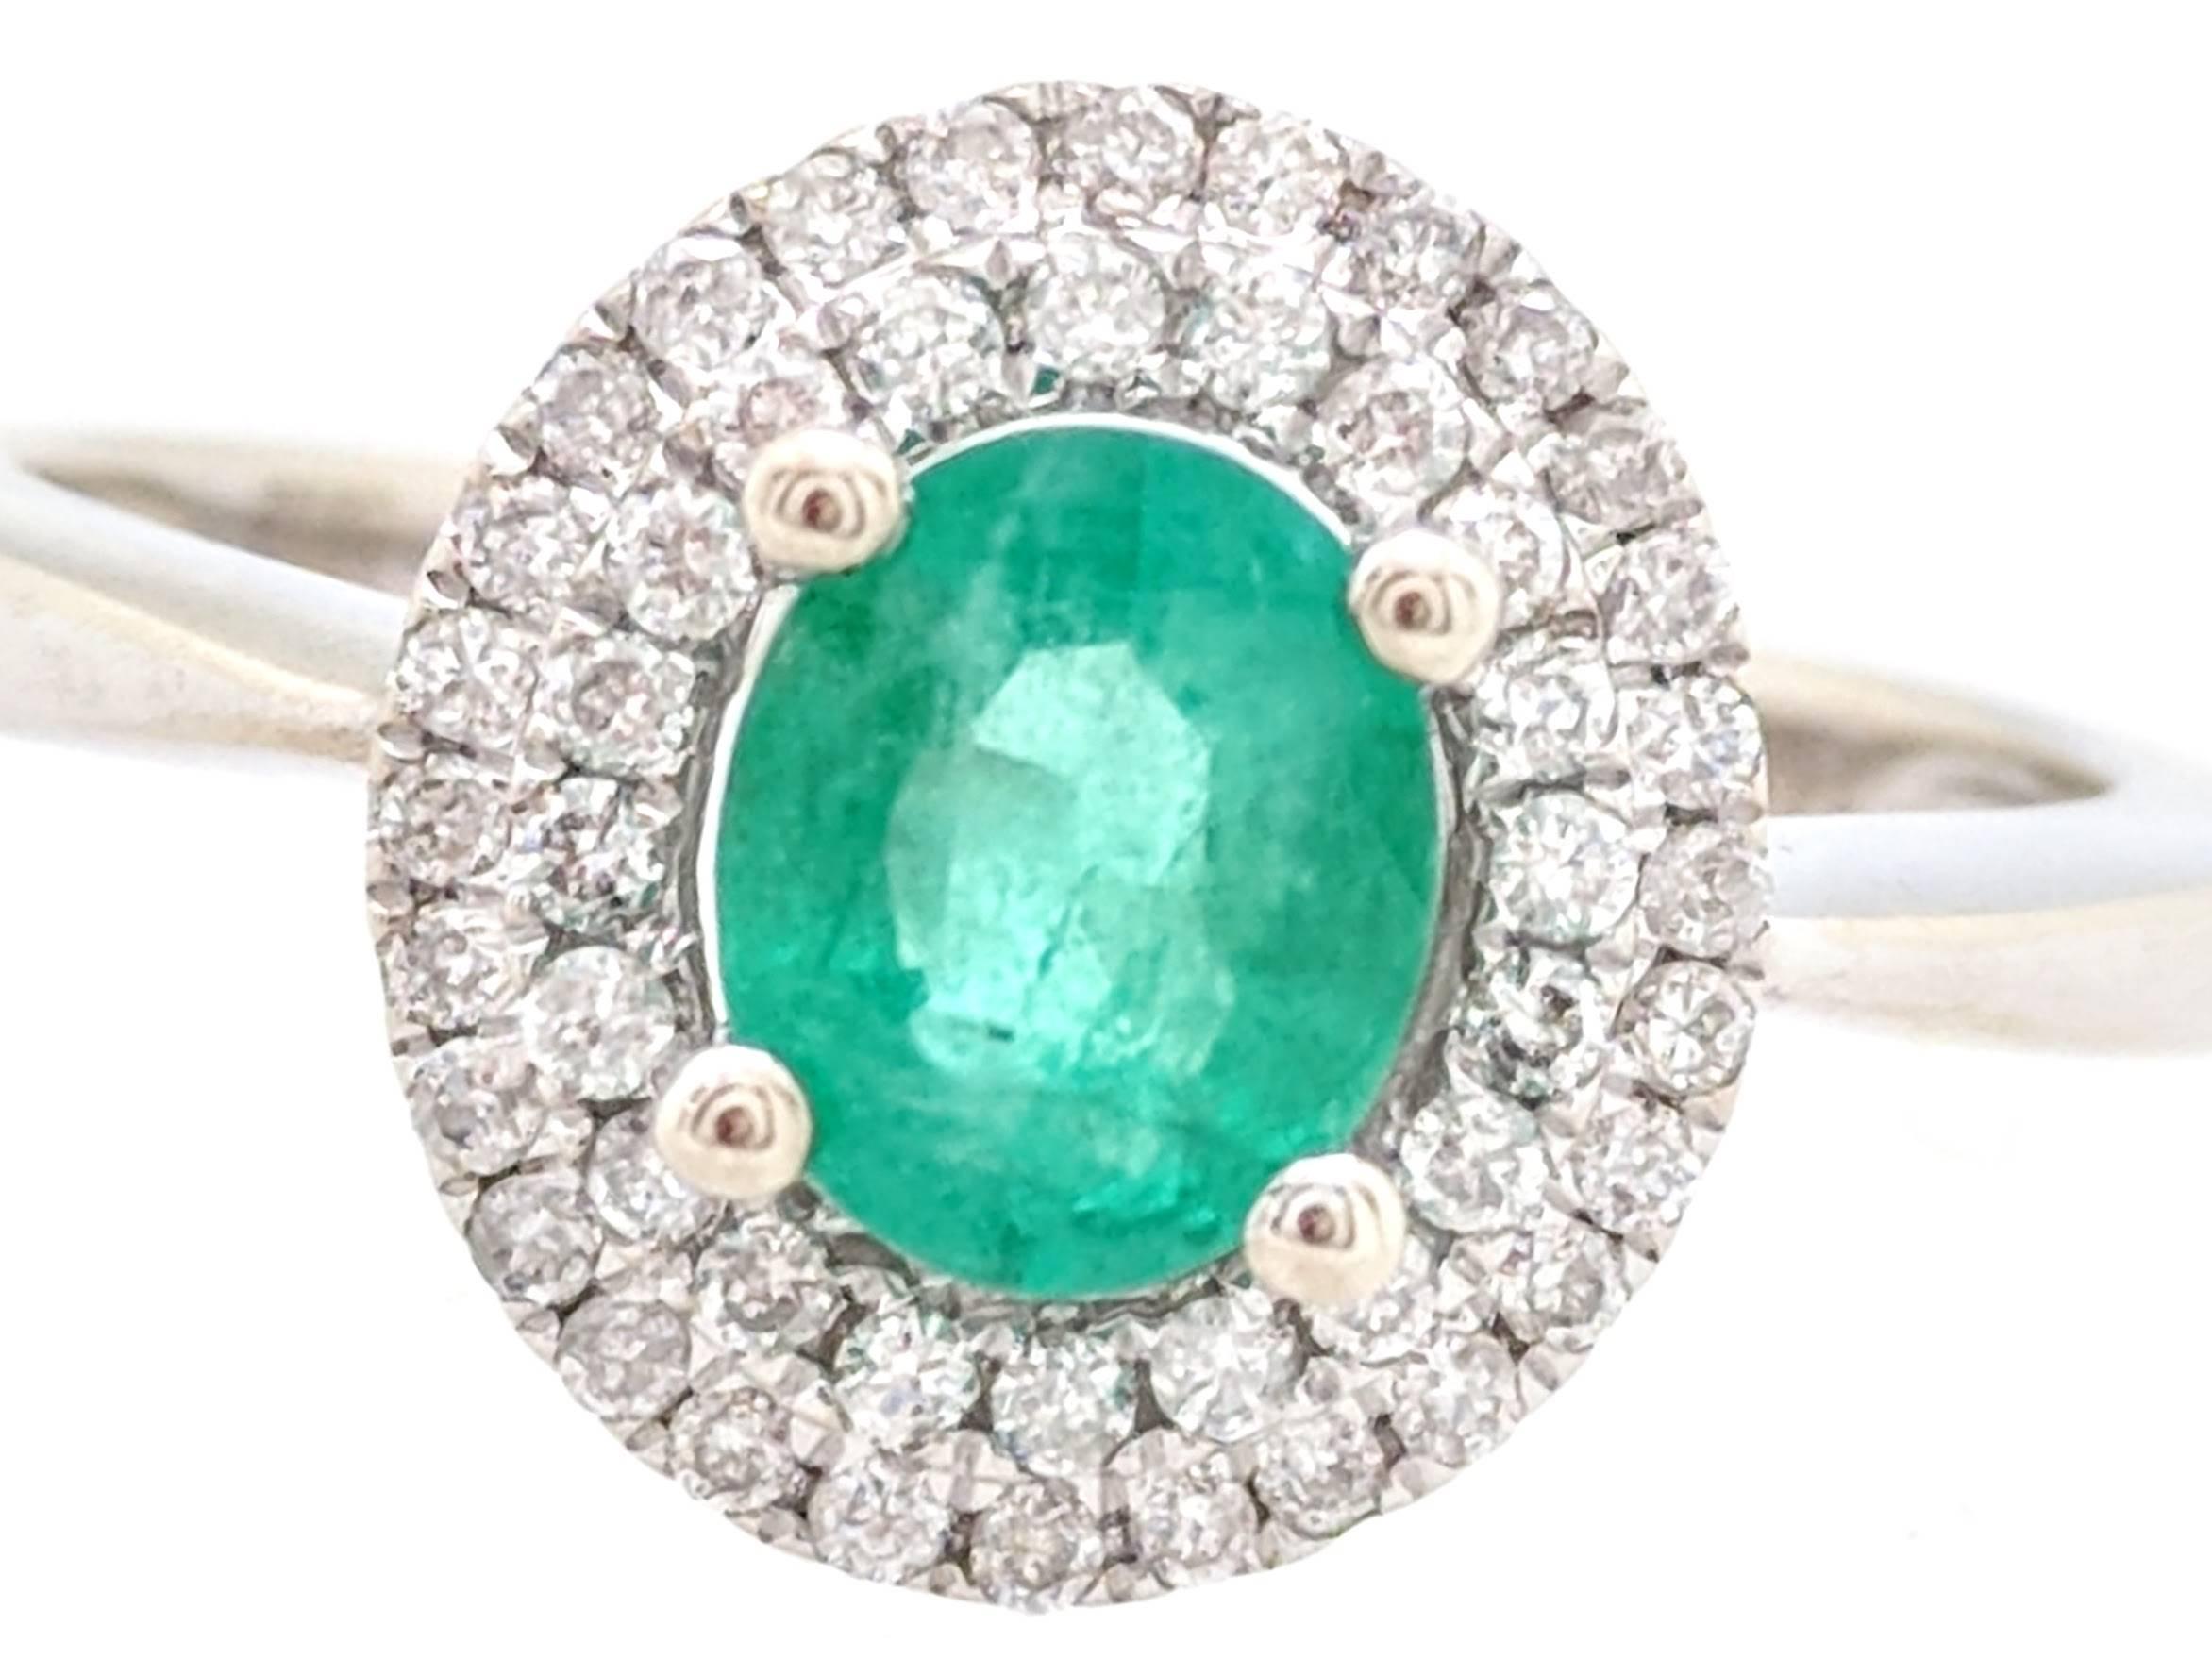 Ladies 14k White Gold .66ct Emerald & Diamond Double Halo Ring Size 7

You are viewing a gorgeous natural oval emerald set in a beautiful double halo diamond setting. The halo setting is crafted from 14k white gold and features .22ctw of natural